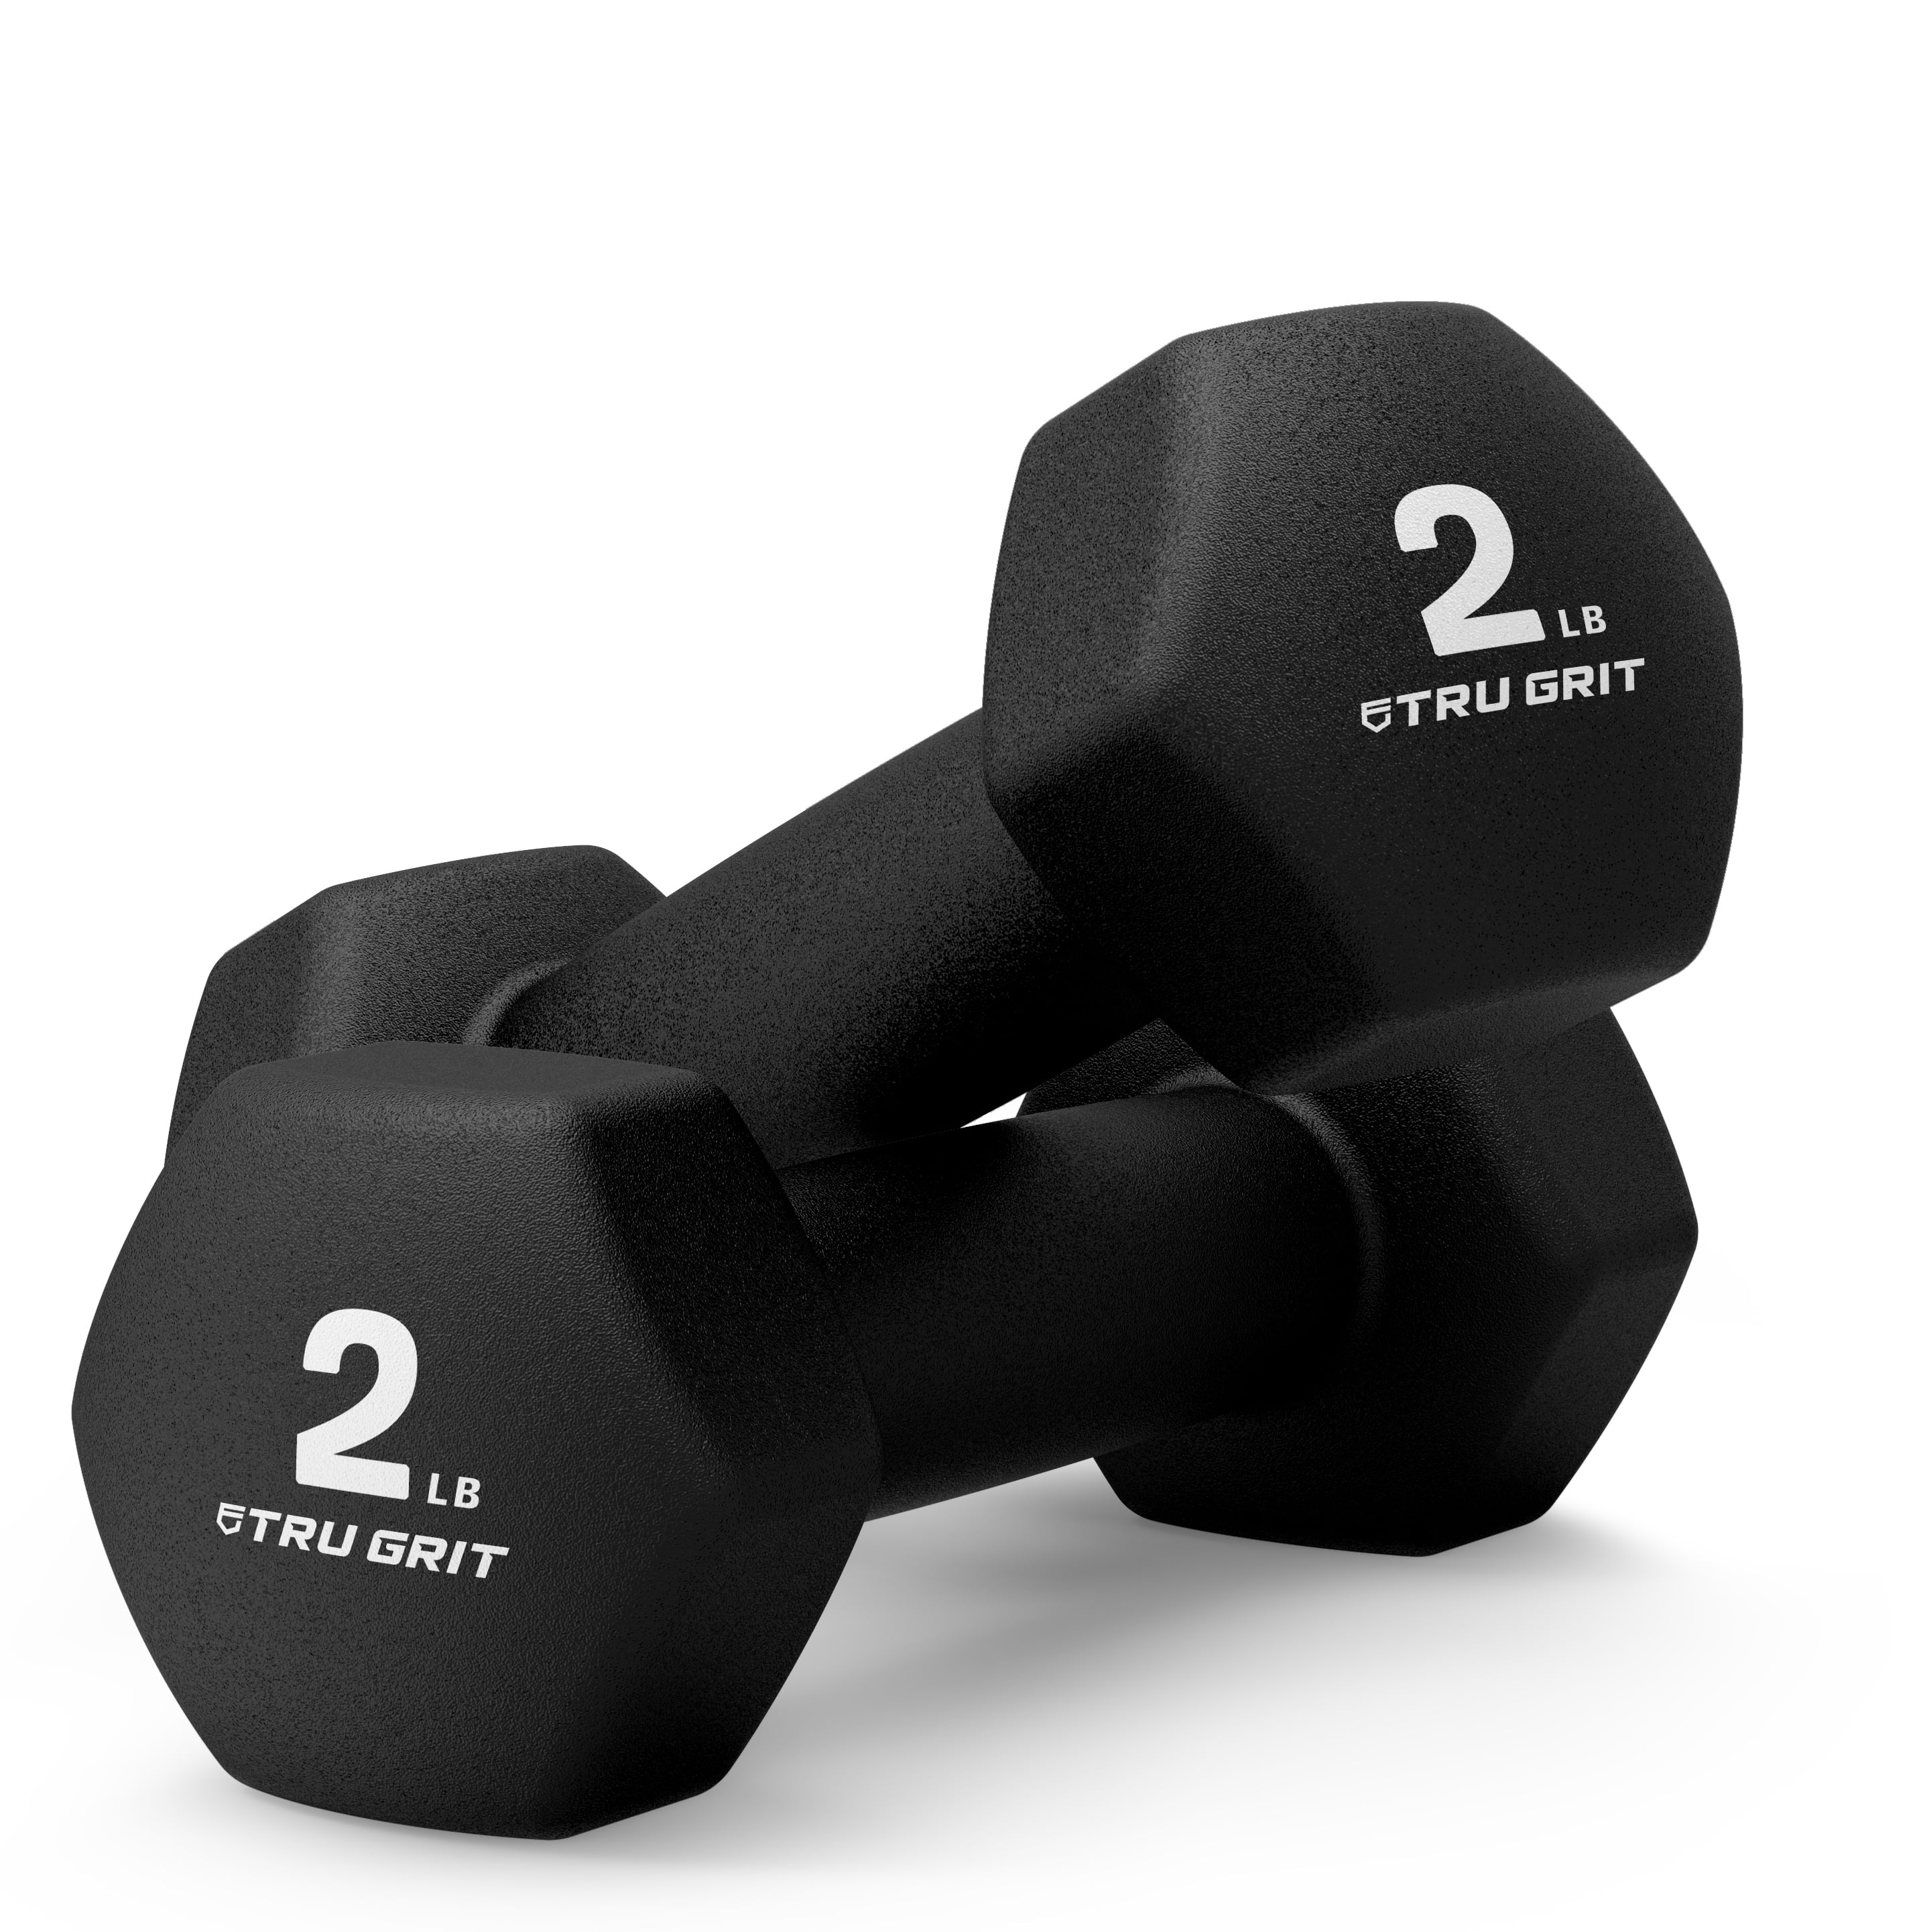 Cap 3 5 and 8 Lb Pound NEOPRENE DUMBBELL Set 32Lb Pair Total FAST SHIP 